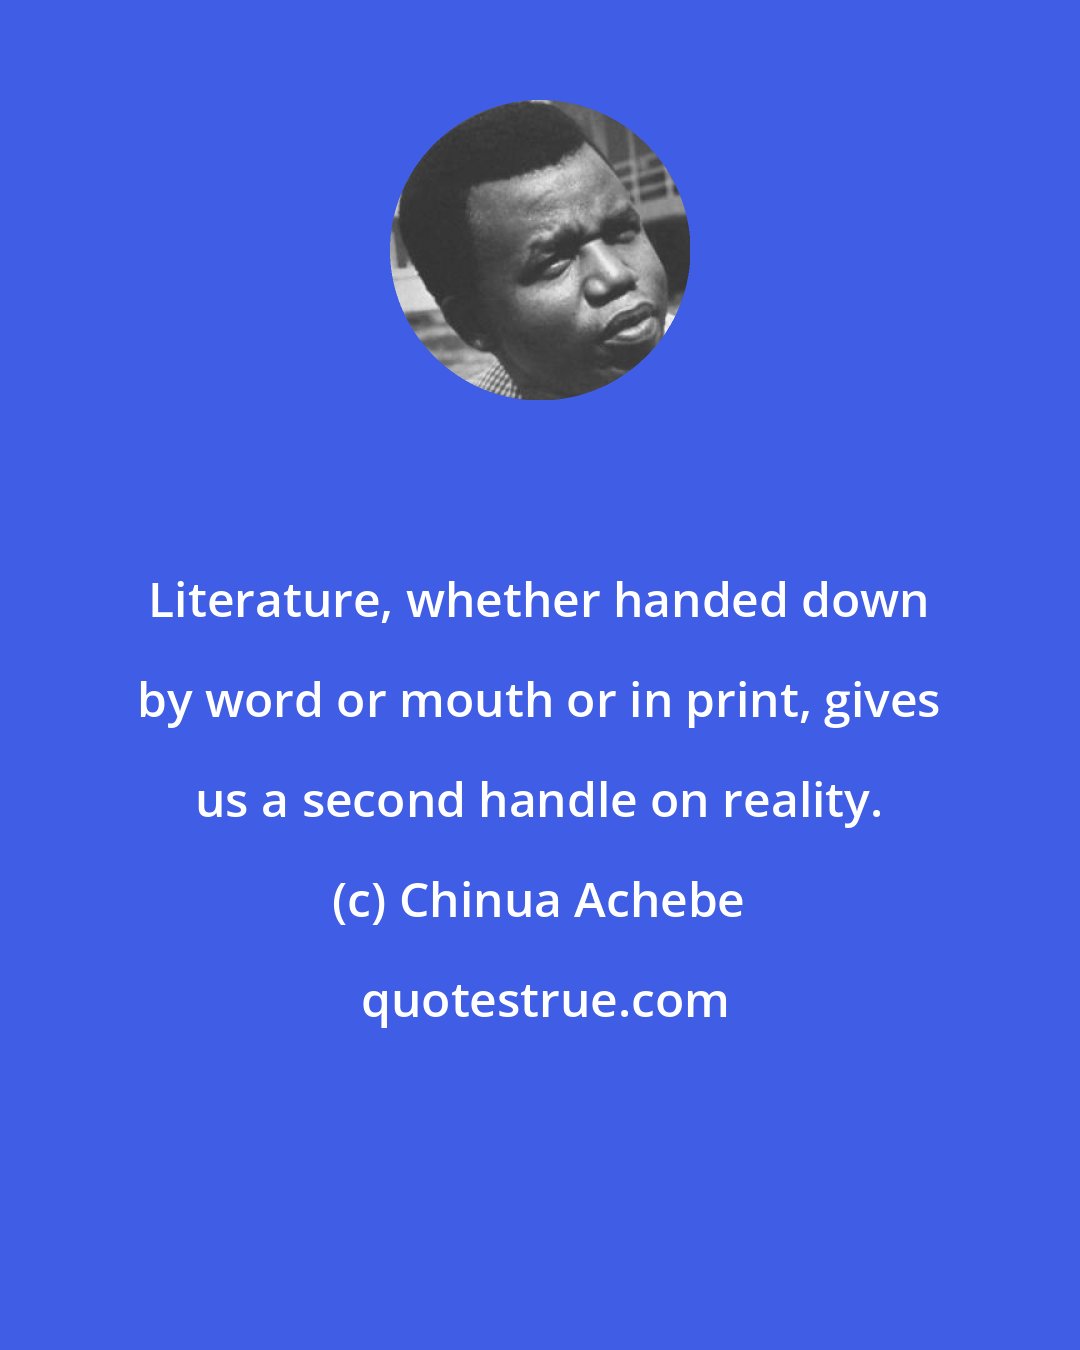 Chinua Achebe: Literature, whether handed down by word or mouth or in print, gives us a second handle on reality.